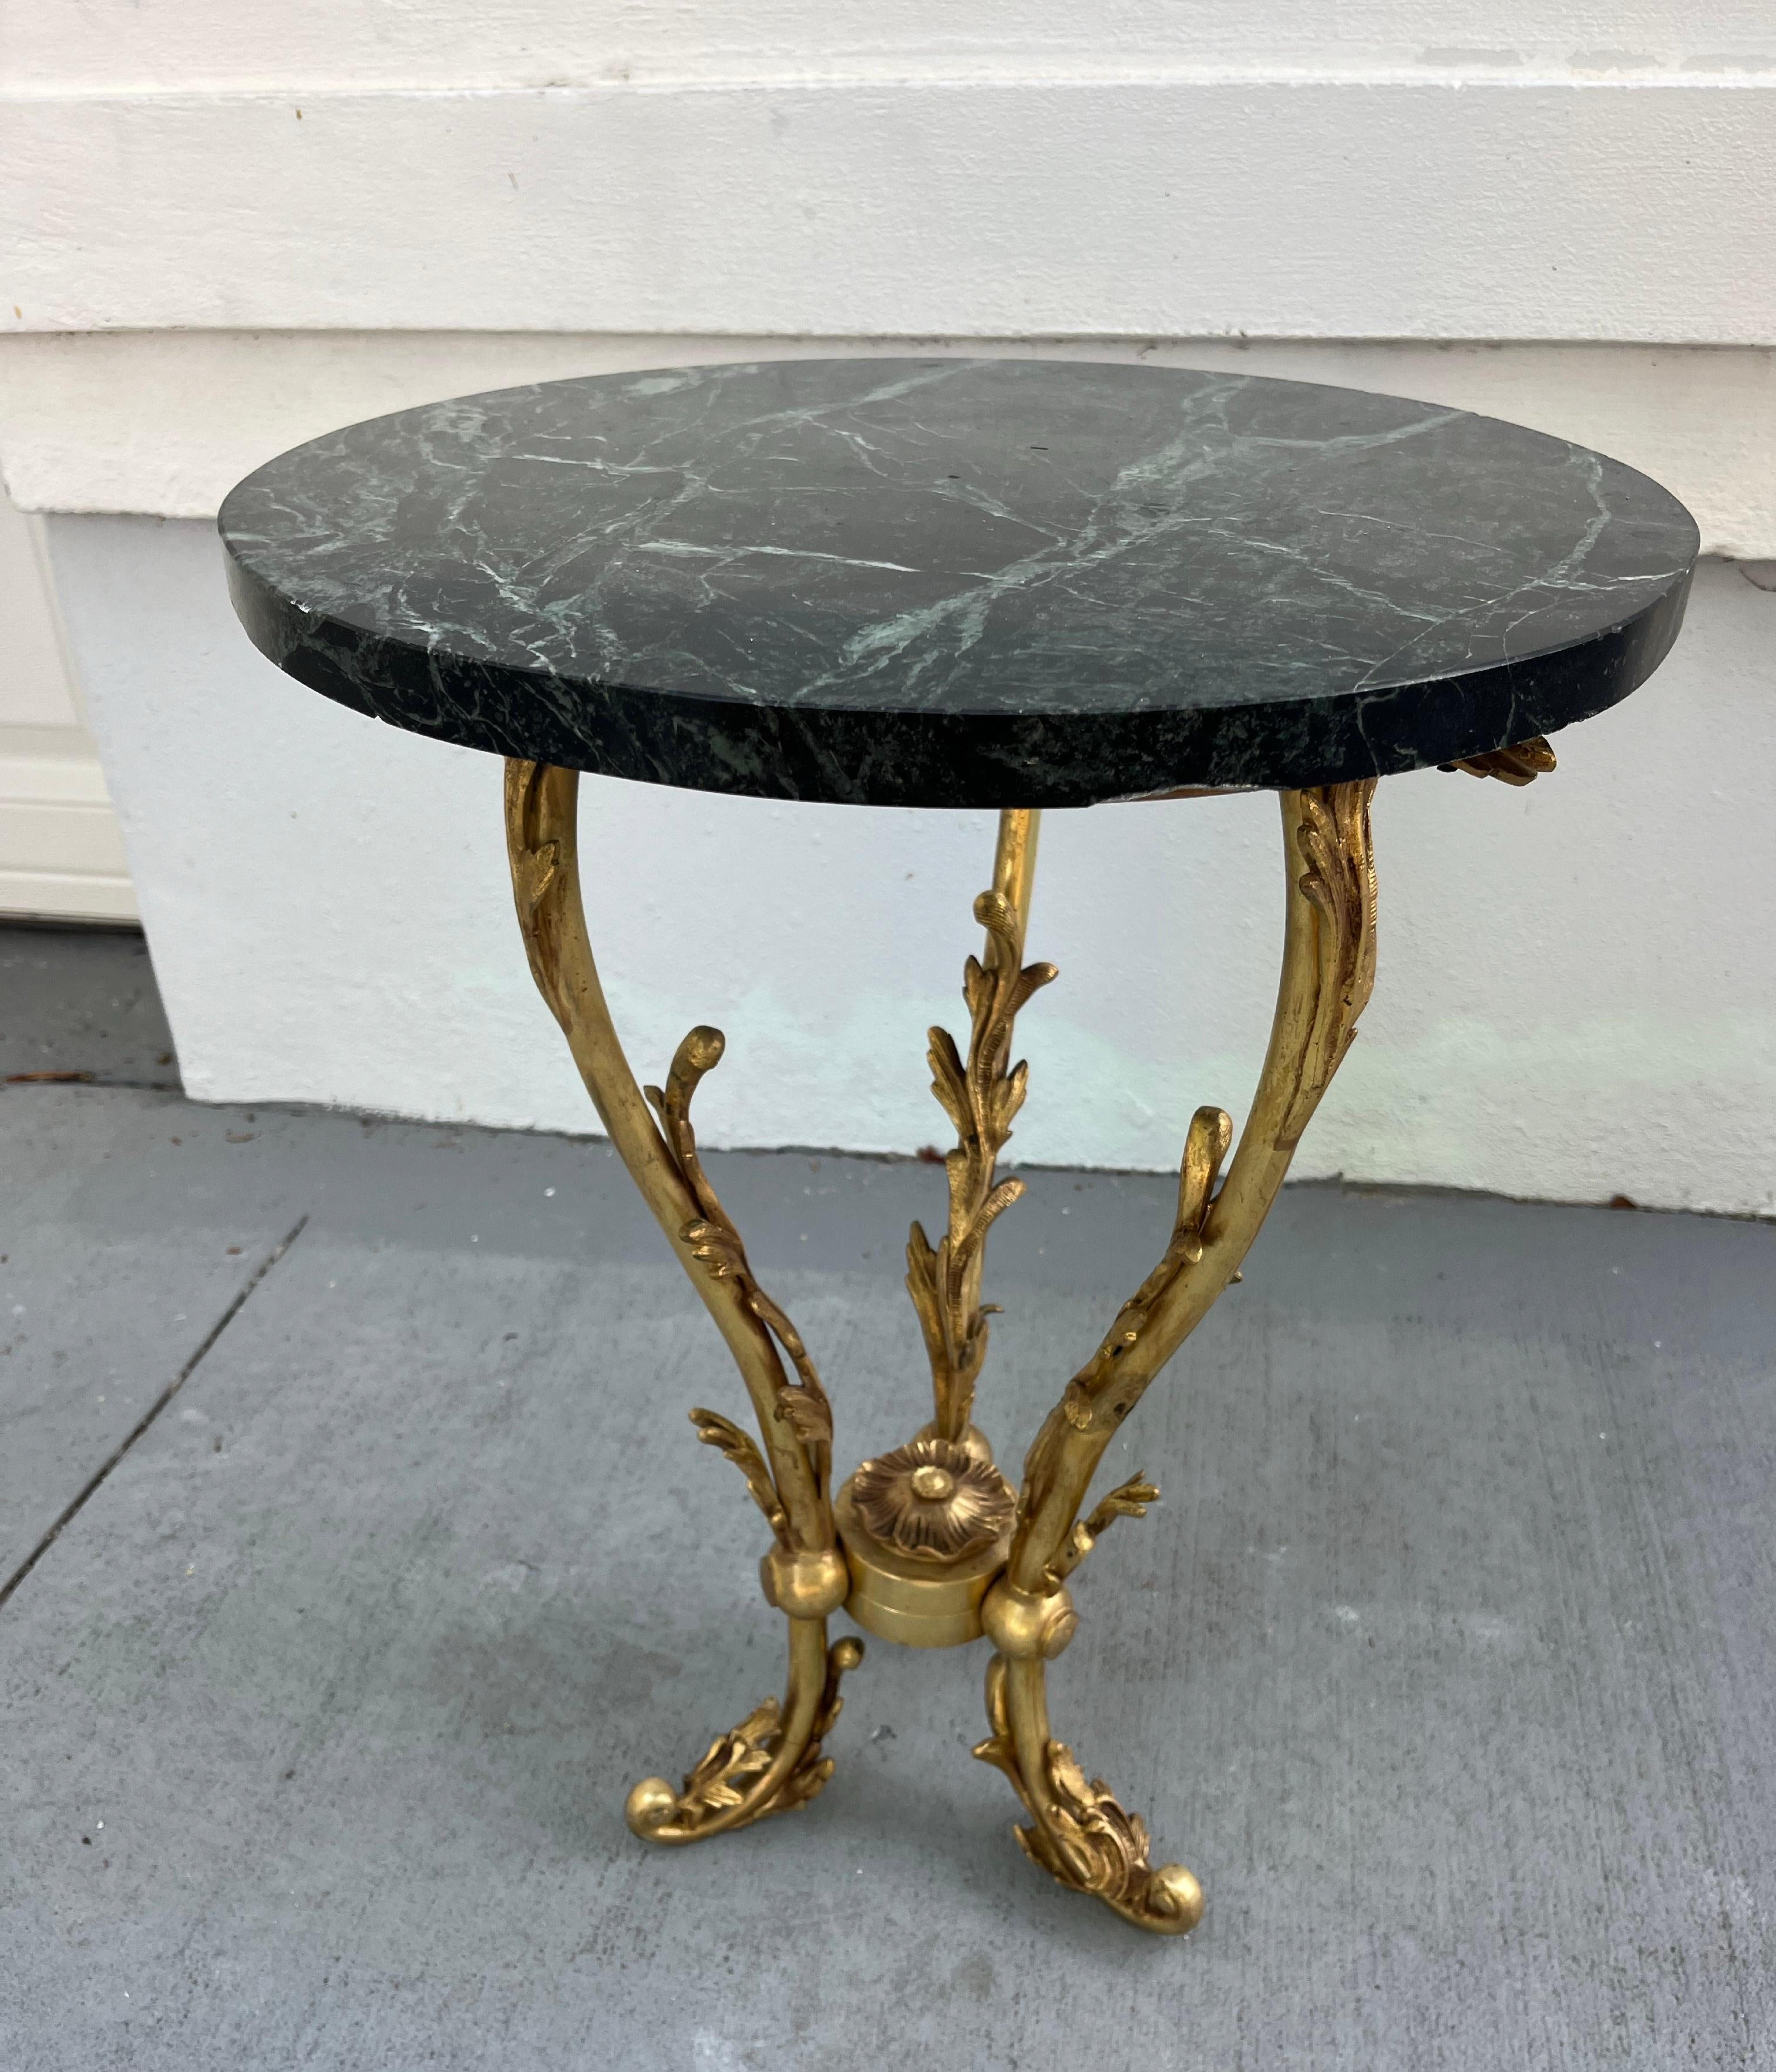 French Art Nouveau Brass Gueridon Marble Top Side Table

Finely crafted round tripod side table with ornate embellished base.This unique Gueridon from the early 20th century has a Verde Antico marble top raised on three brass legs with finely chased